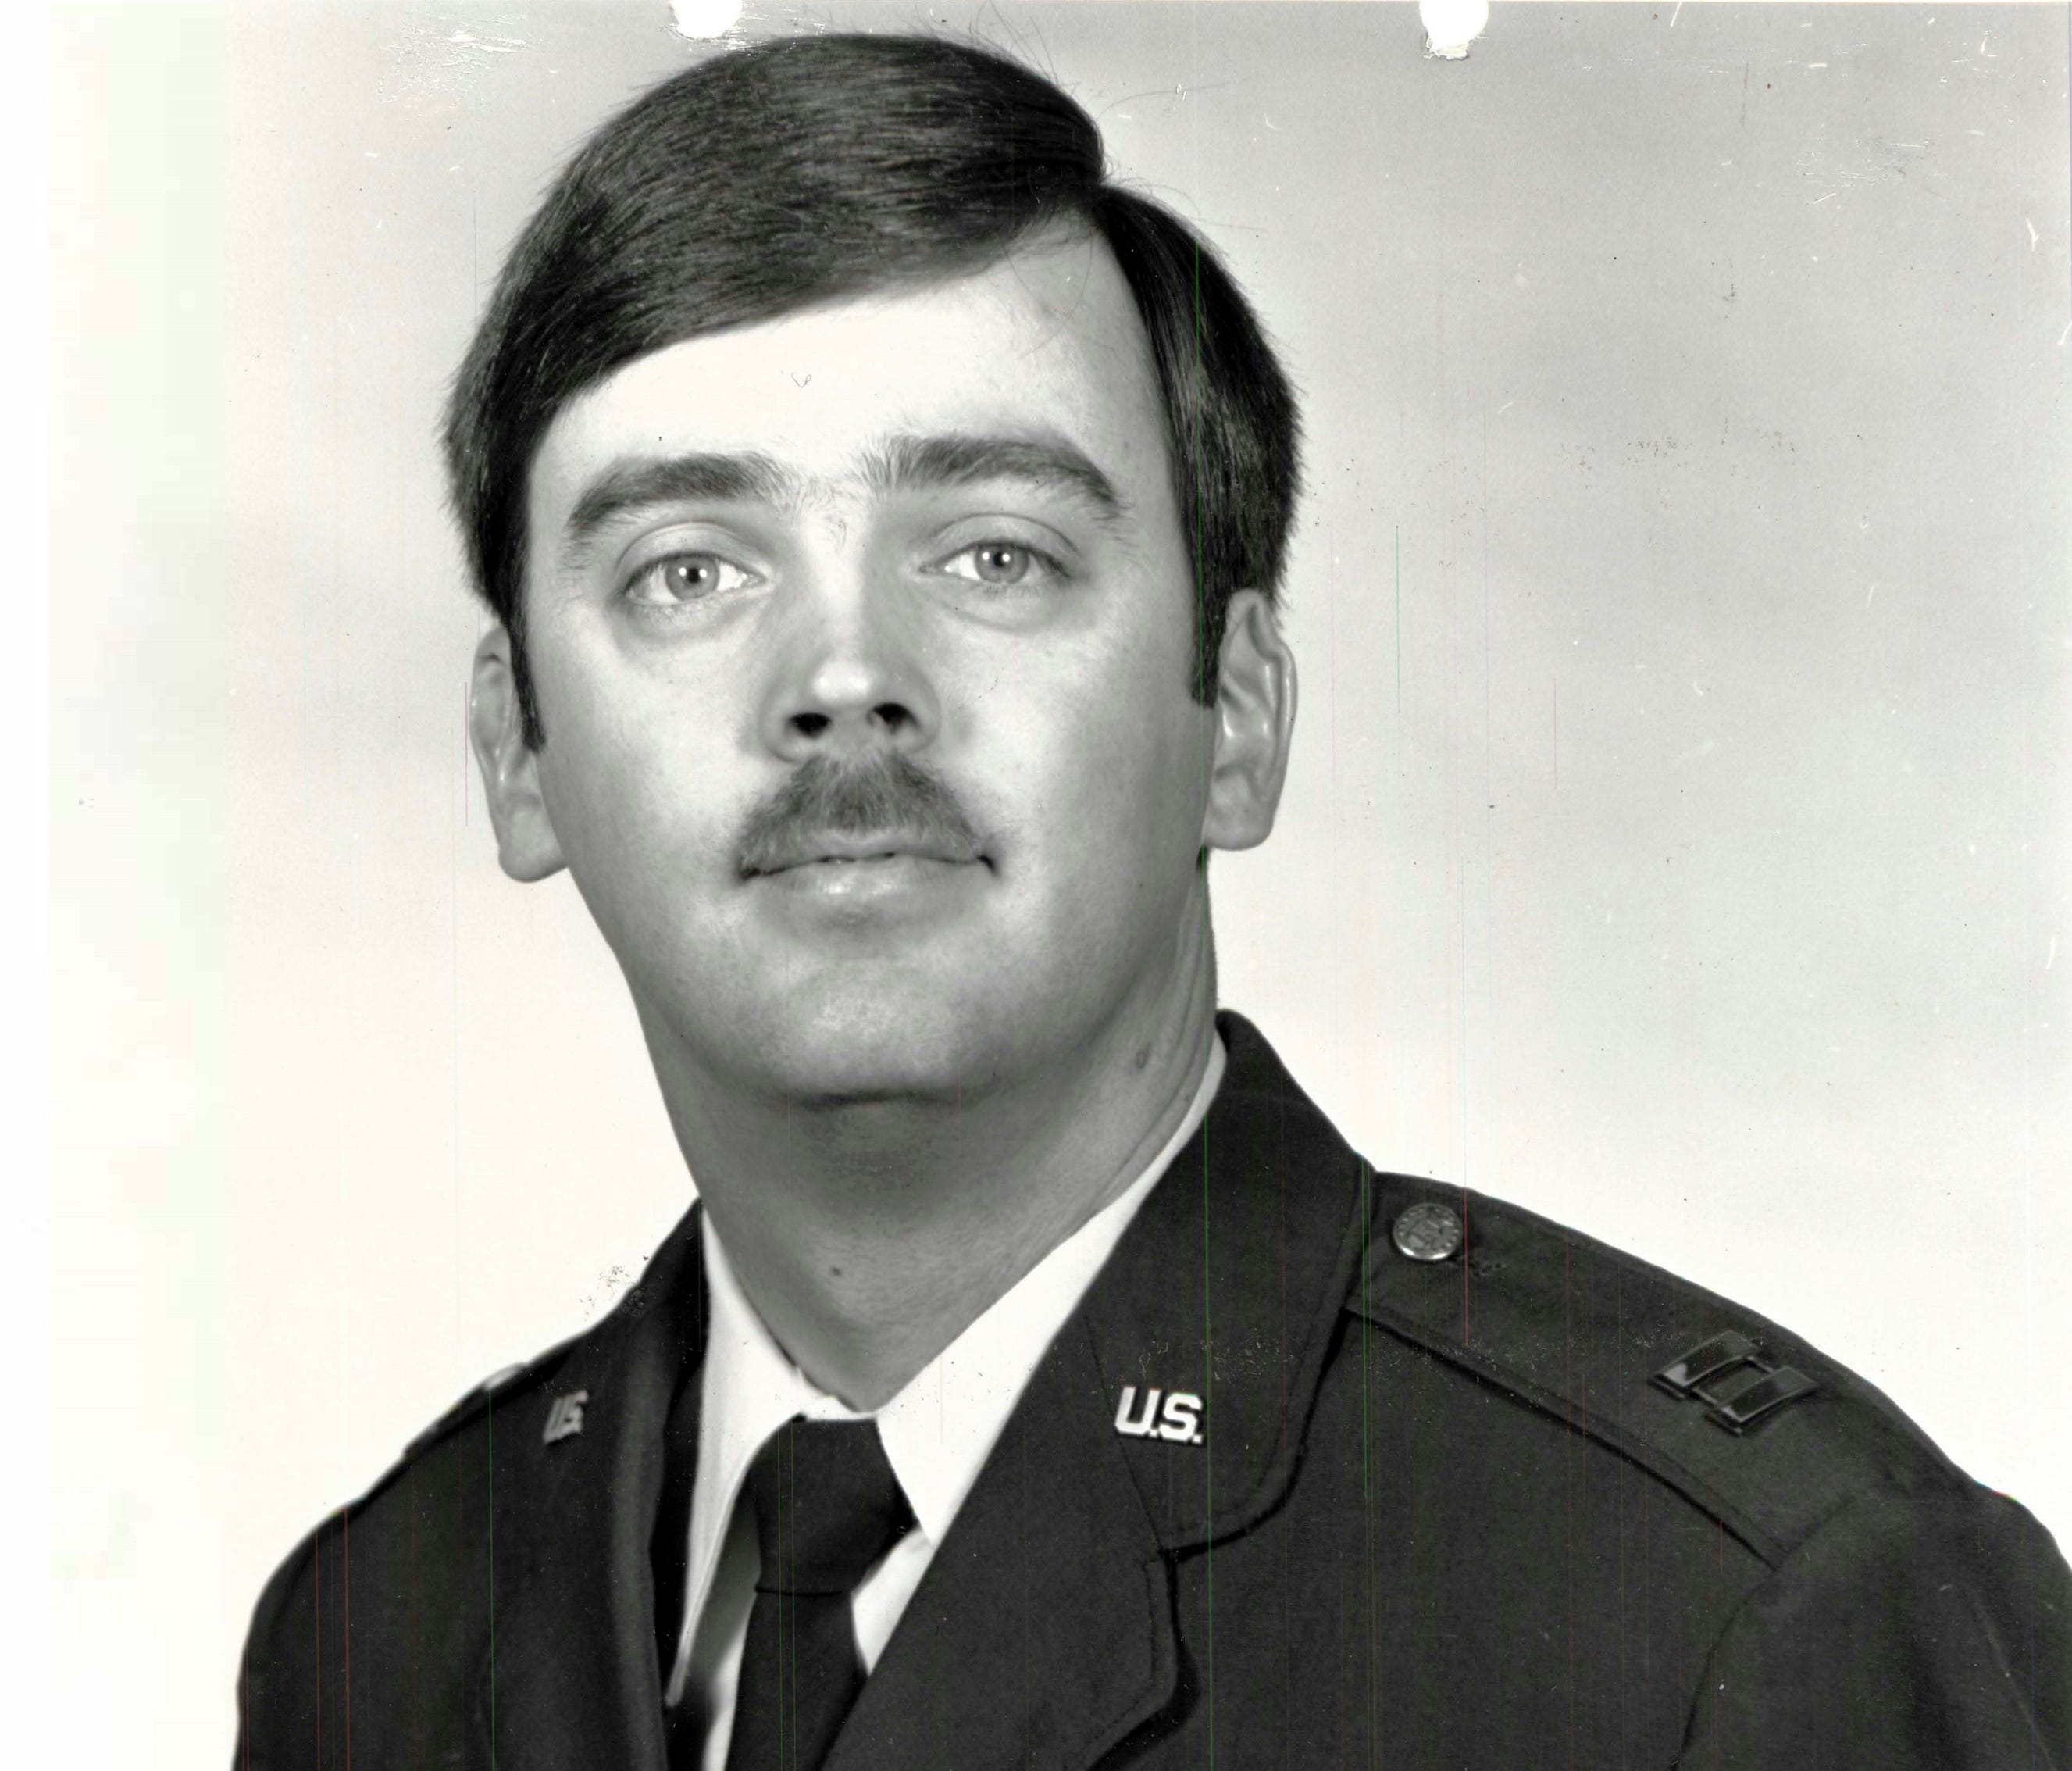 This undated photo released by the U.S. Air Force shows Capt. William Howard Hughes, Jr., who was formally declared a deserter by the Air Force Dec. 9, 1983. He was apprehended June 6 by Air Force Office of Special Investigations Special Agents from 